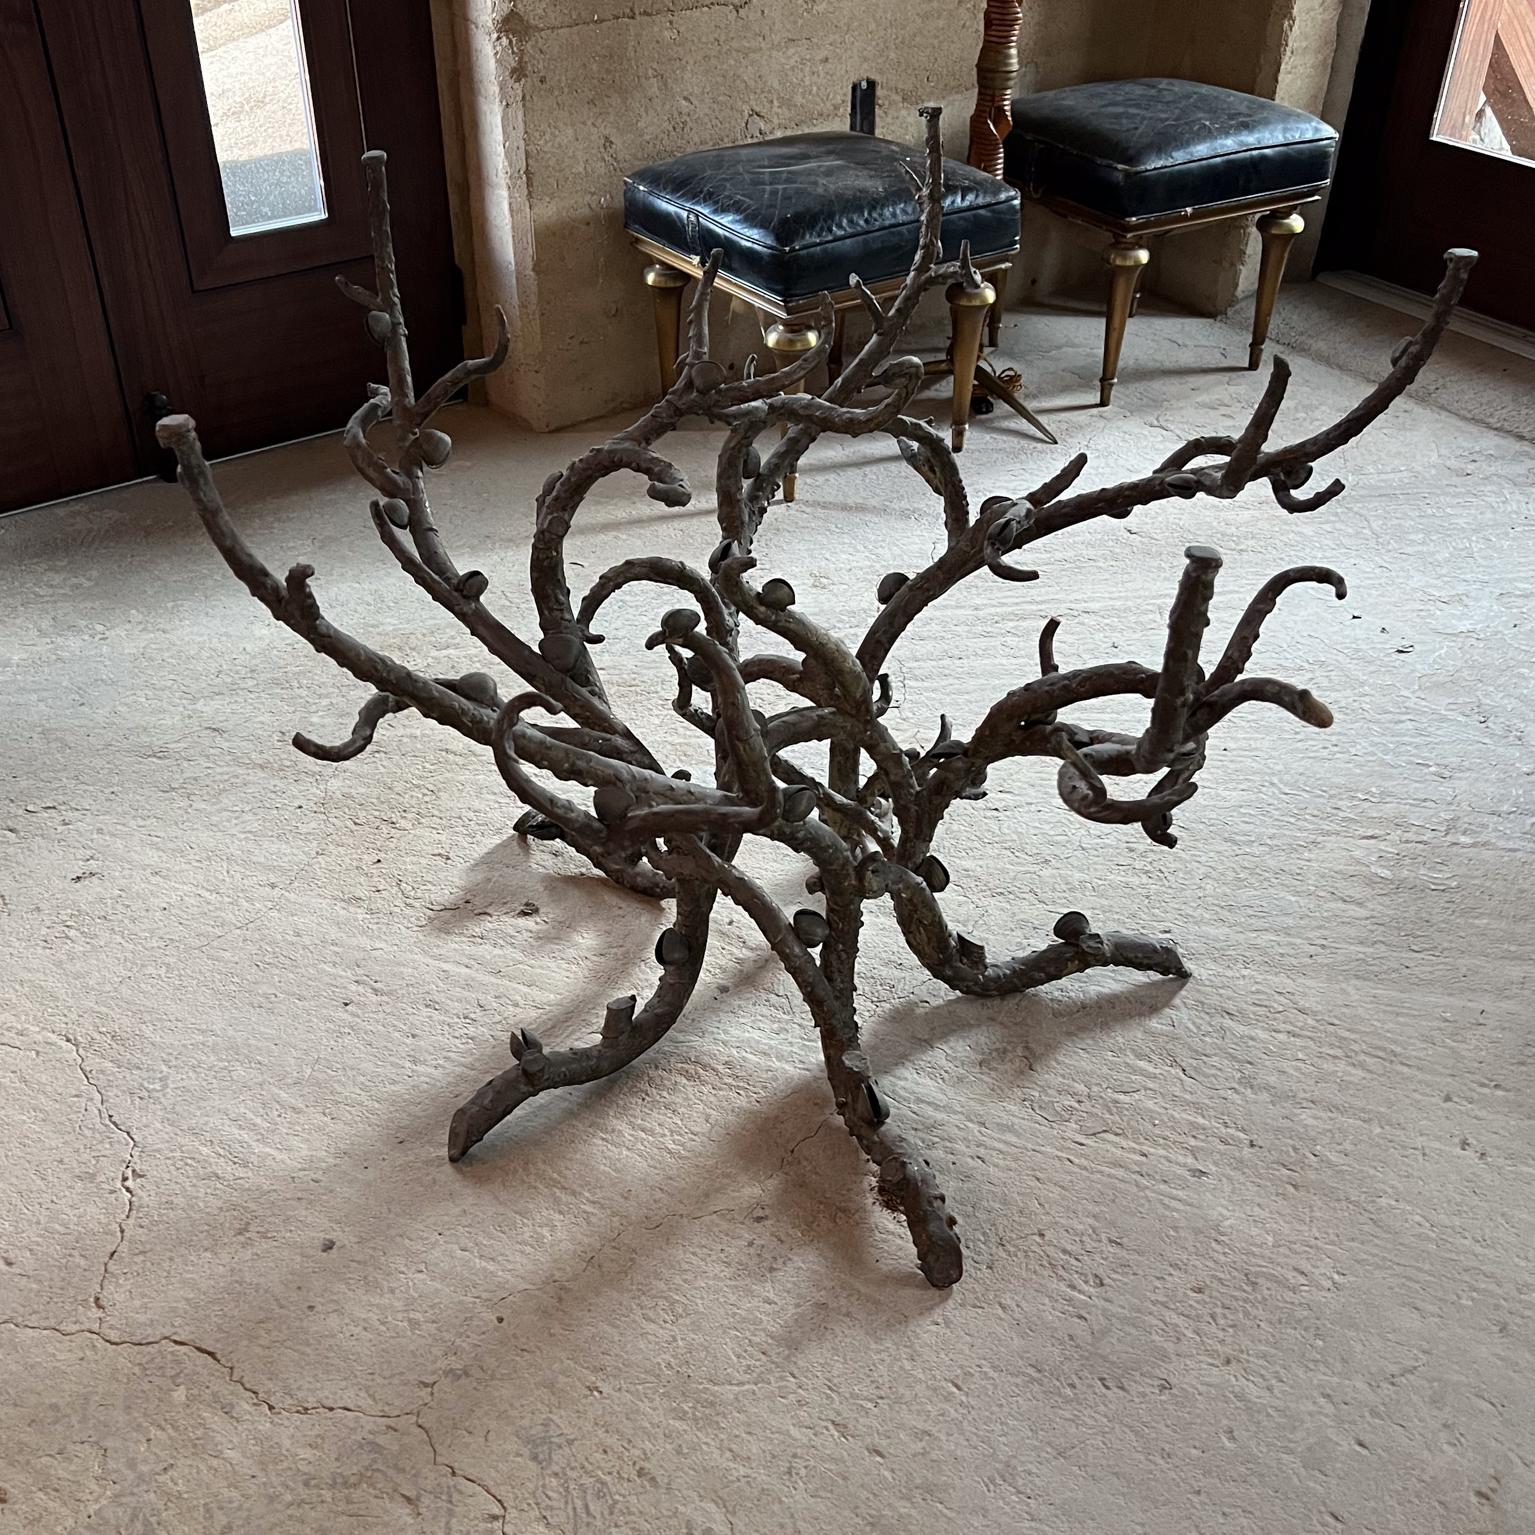 1970s Bronze & Brass Sculptural Dining Table Base 
Marine art clamshell and sea creatures intertwined gracefully.
Unmarked.
Listing is for table base only.
39.25 diameter x 28.5
Original preowned vintage condition unrestored.
See our images